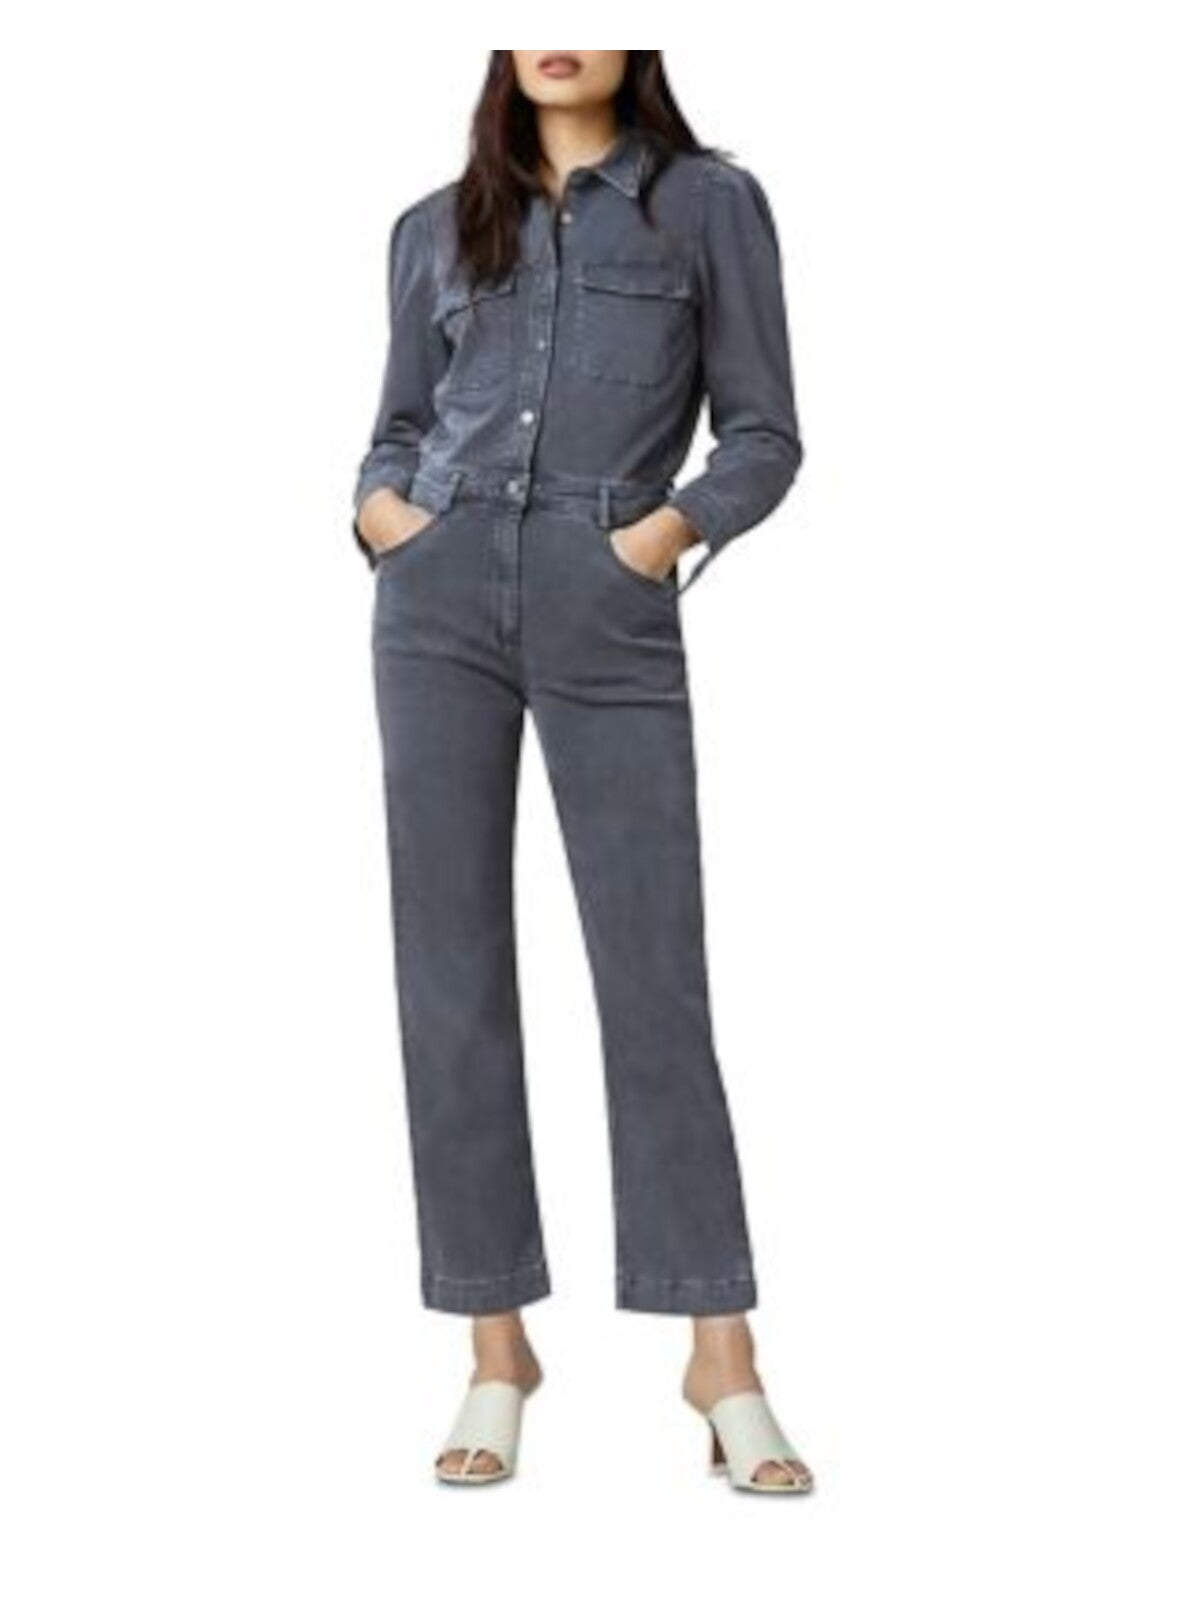 DL1961 Womens Gray Stretch Pocketed Zippered Front Snap Coveralls Long Sleeve Collared Jumpsuit XS